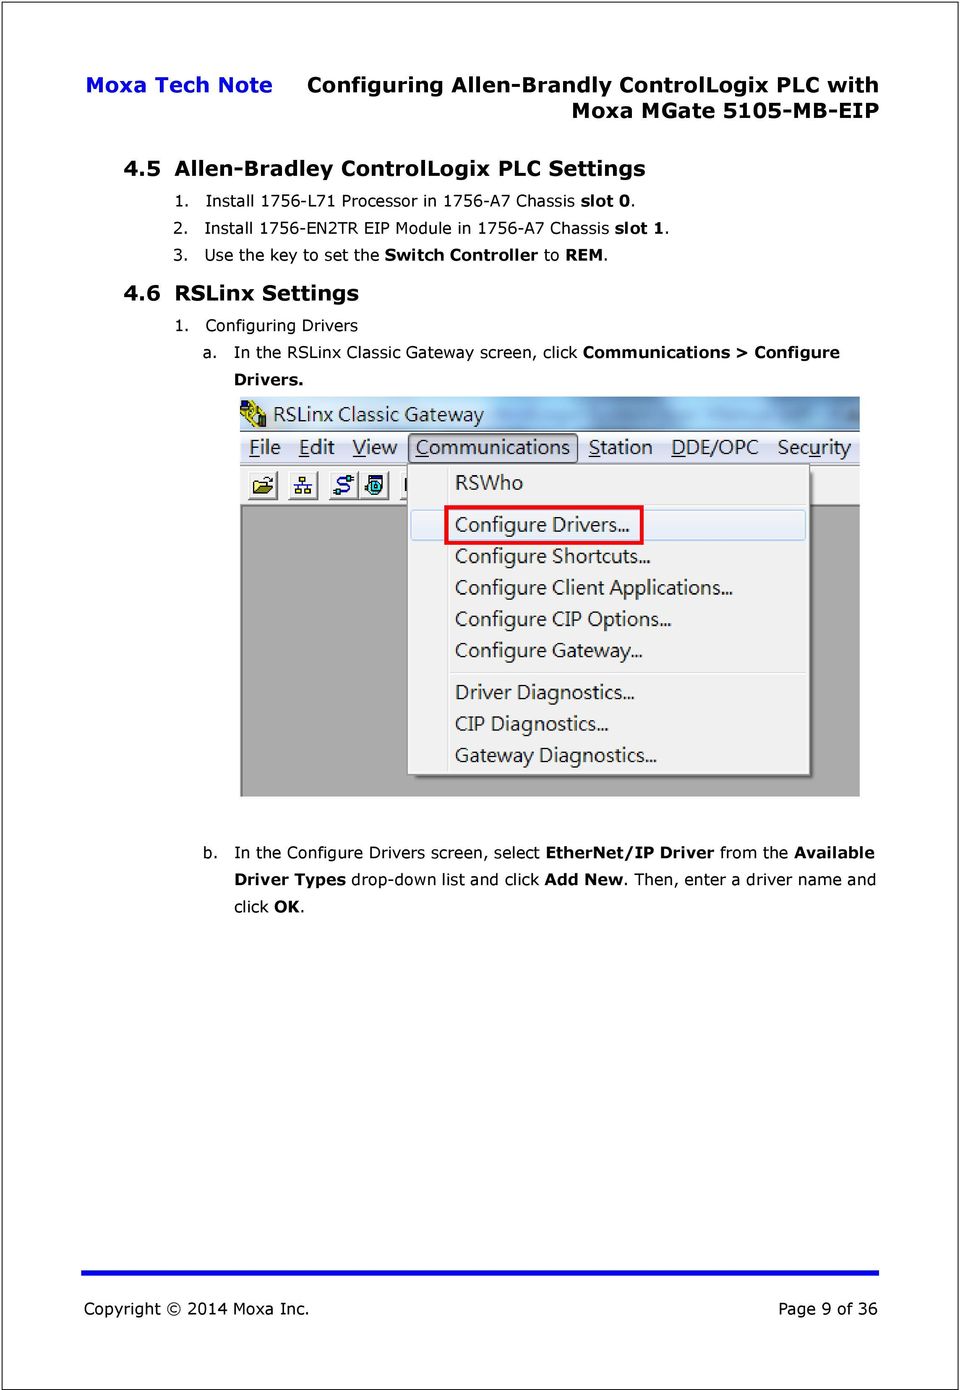 Configuring Drivers a. In the RSLinx Classic Gateway screen, click Communications > Configure Drivers. b.